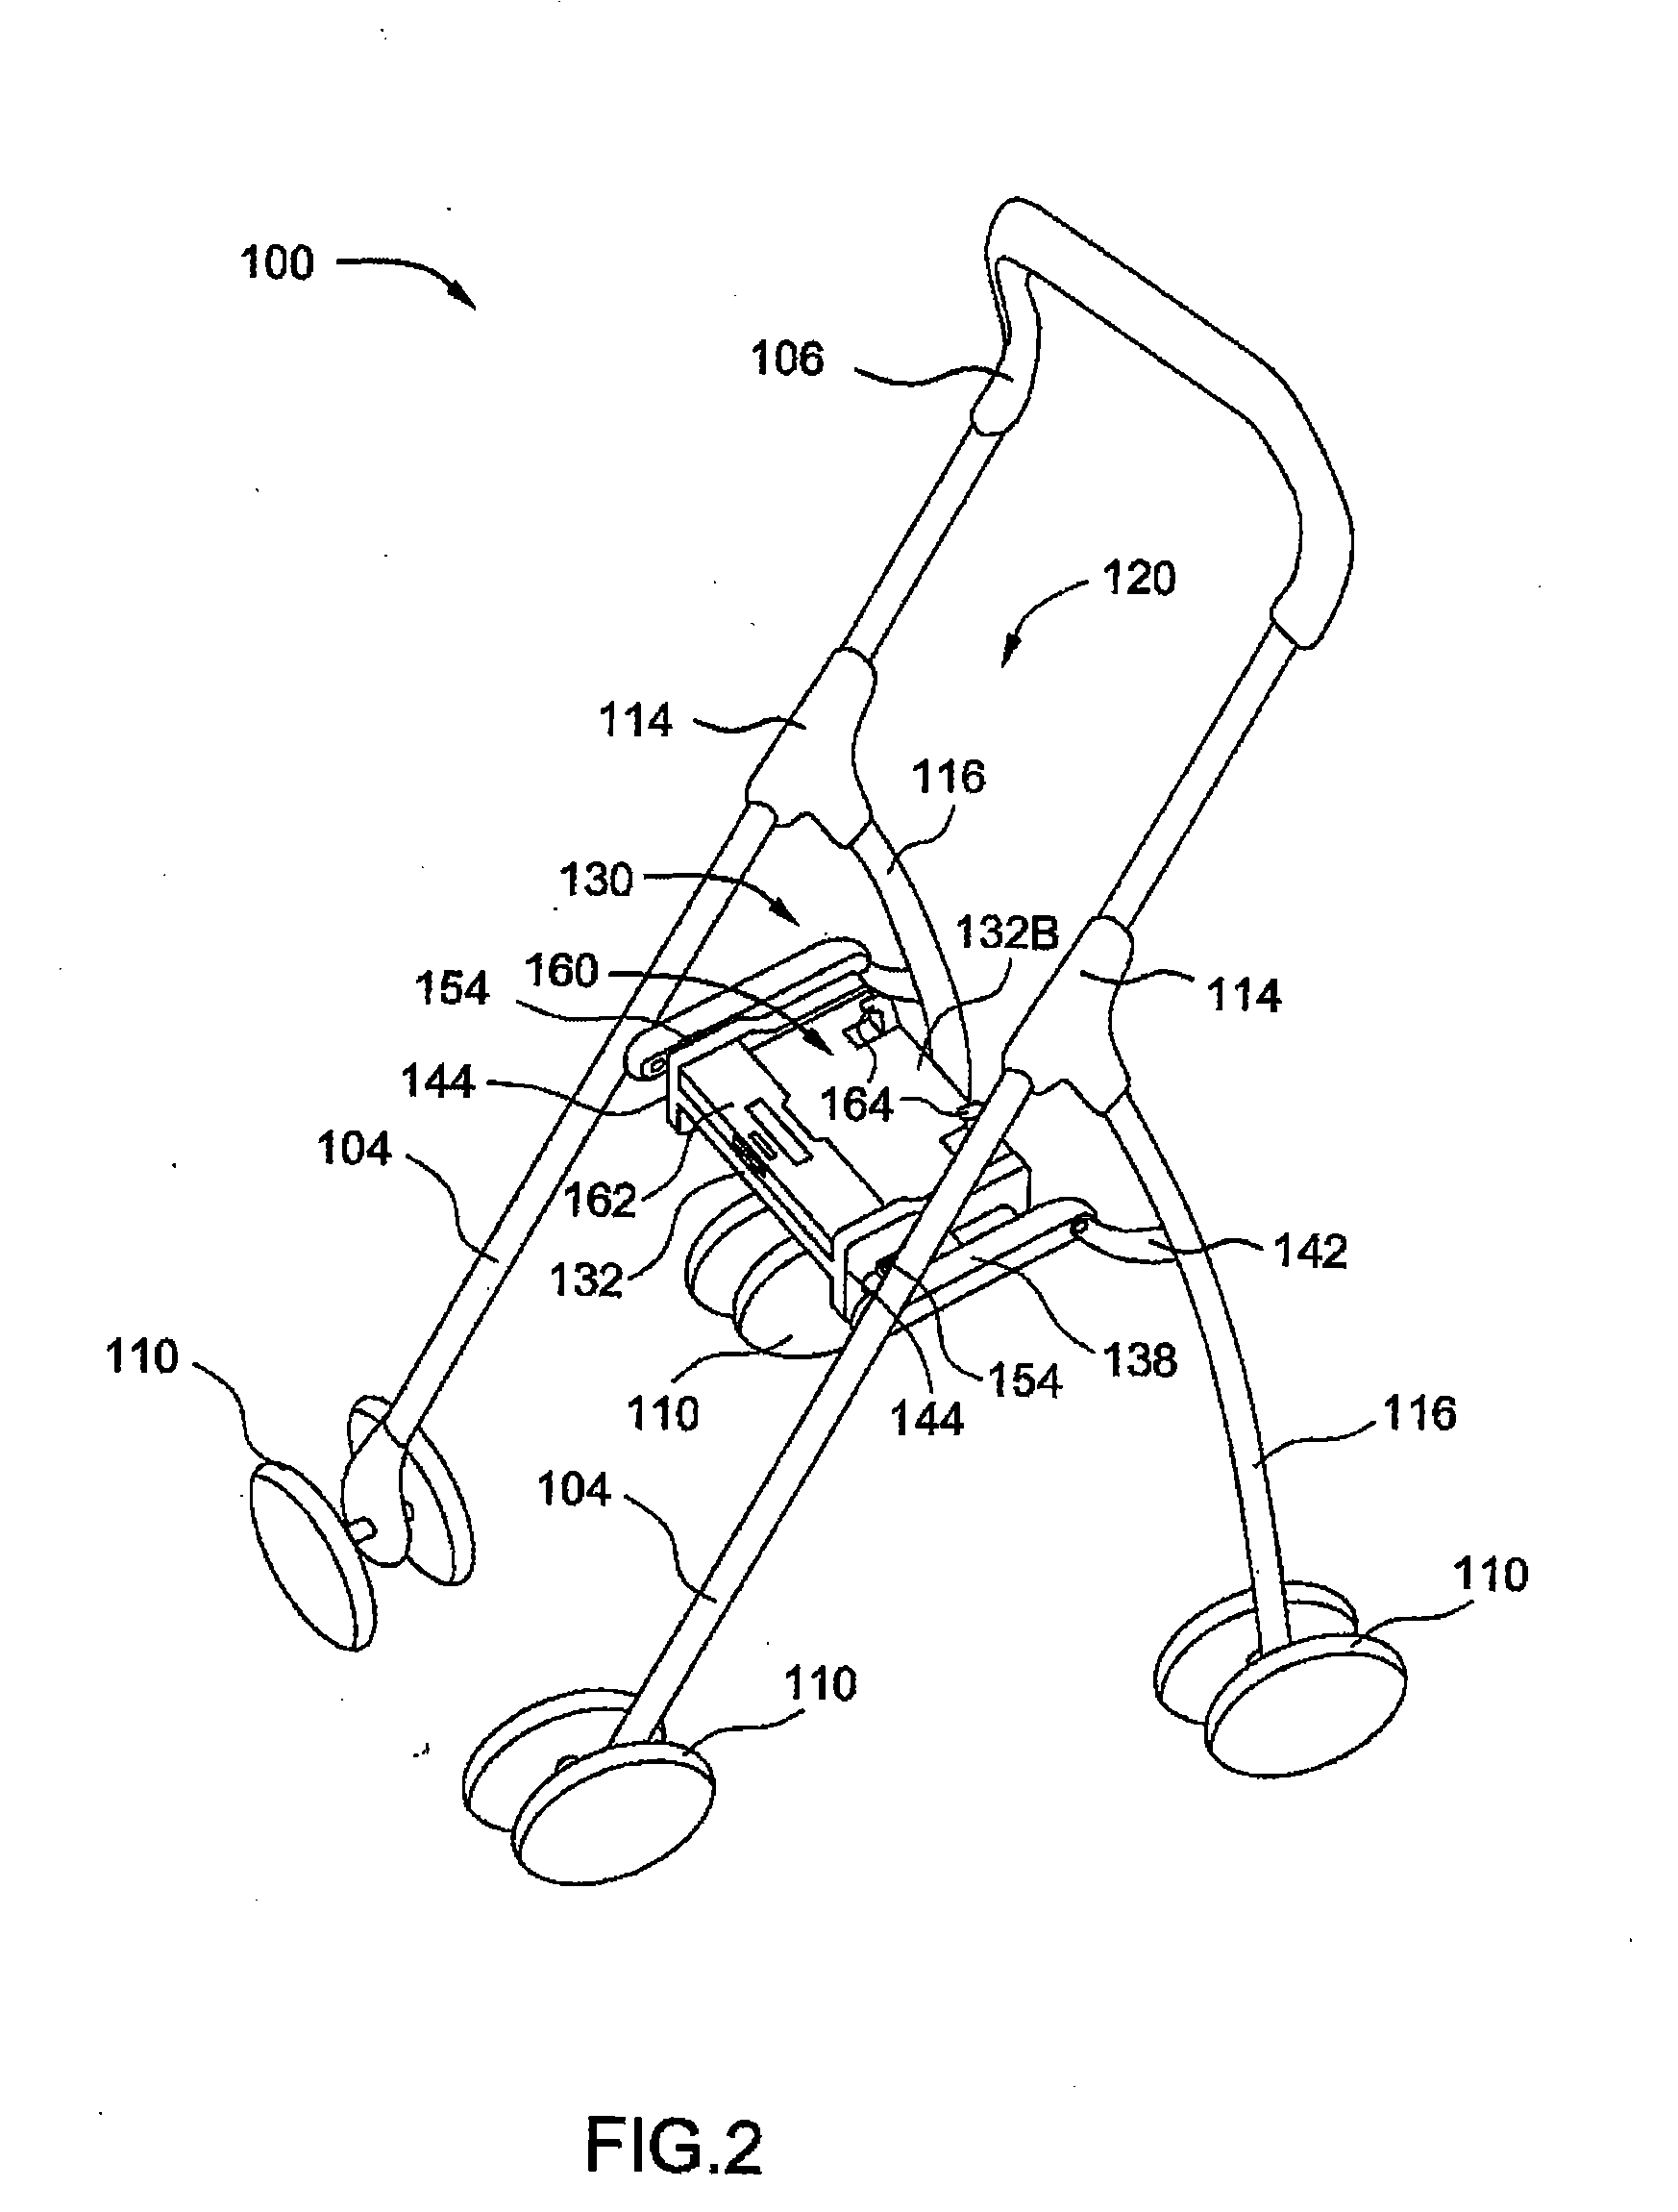 System and Method for Mounting Different Types of Infant Carriers on a Support Structure